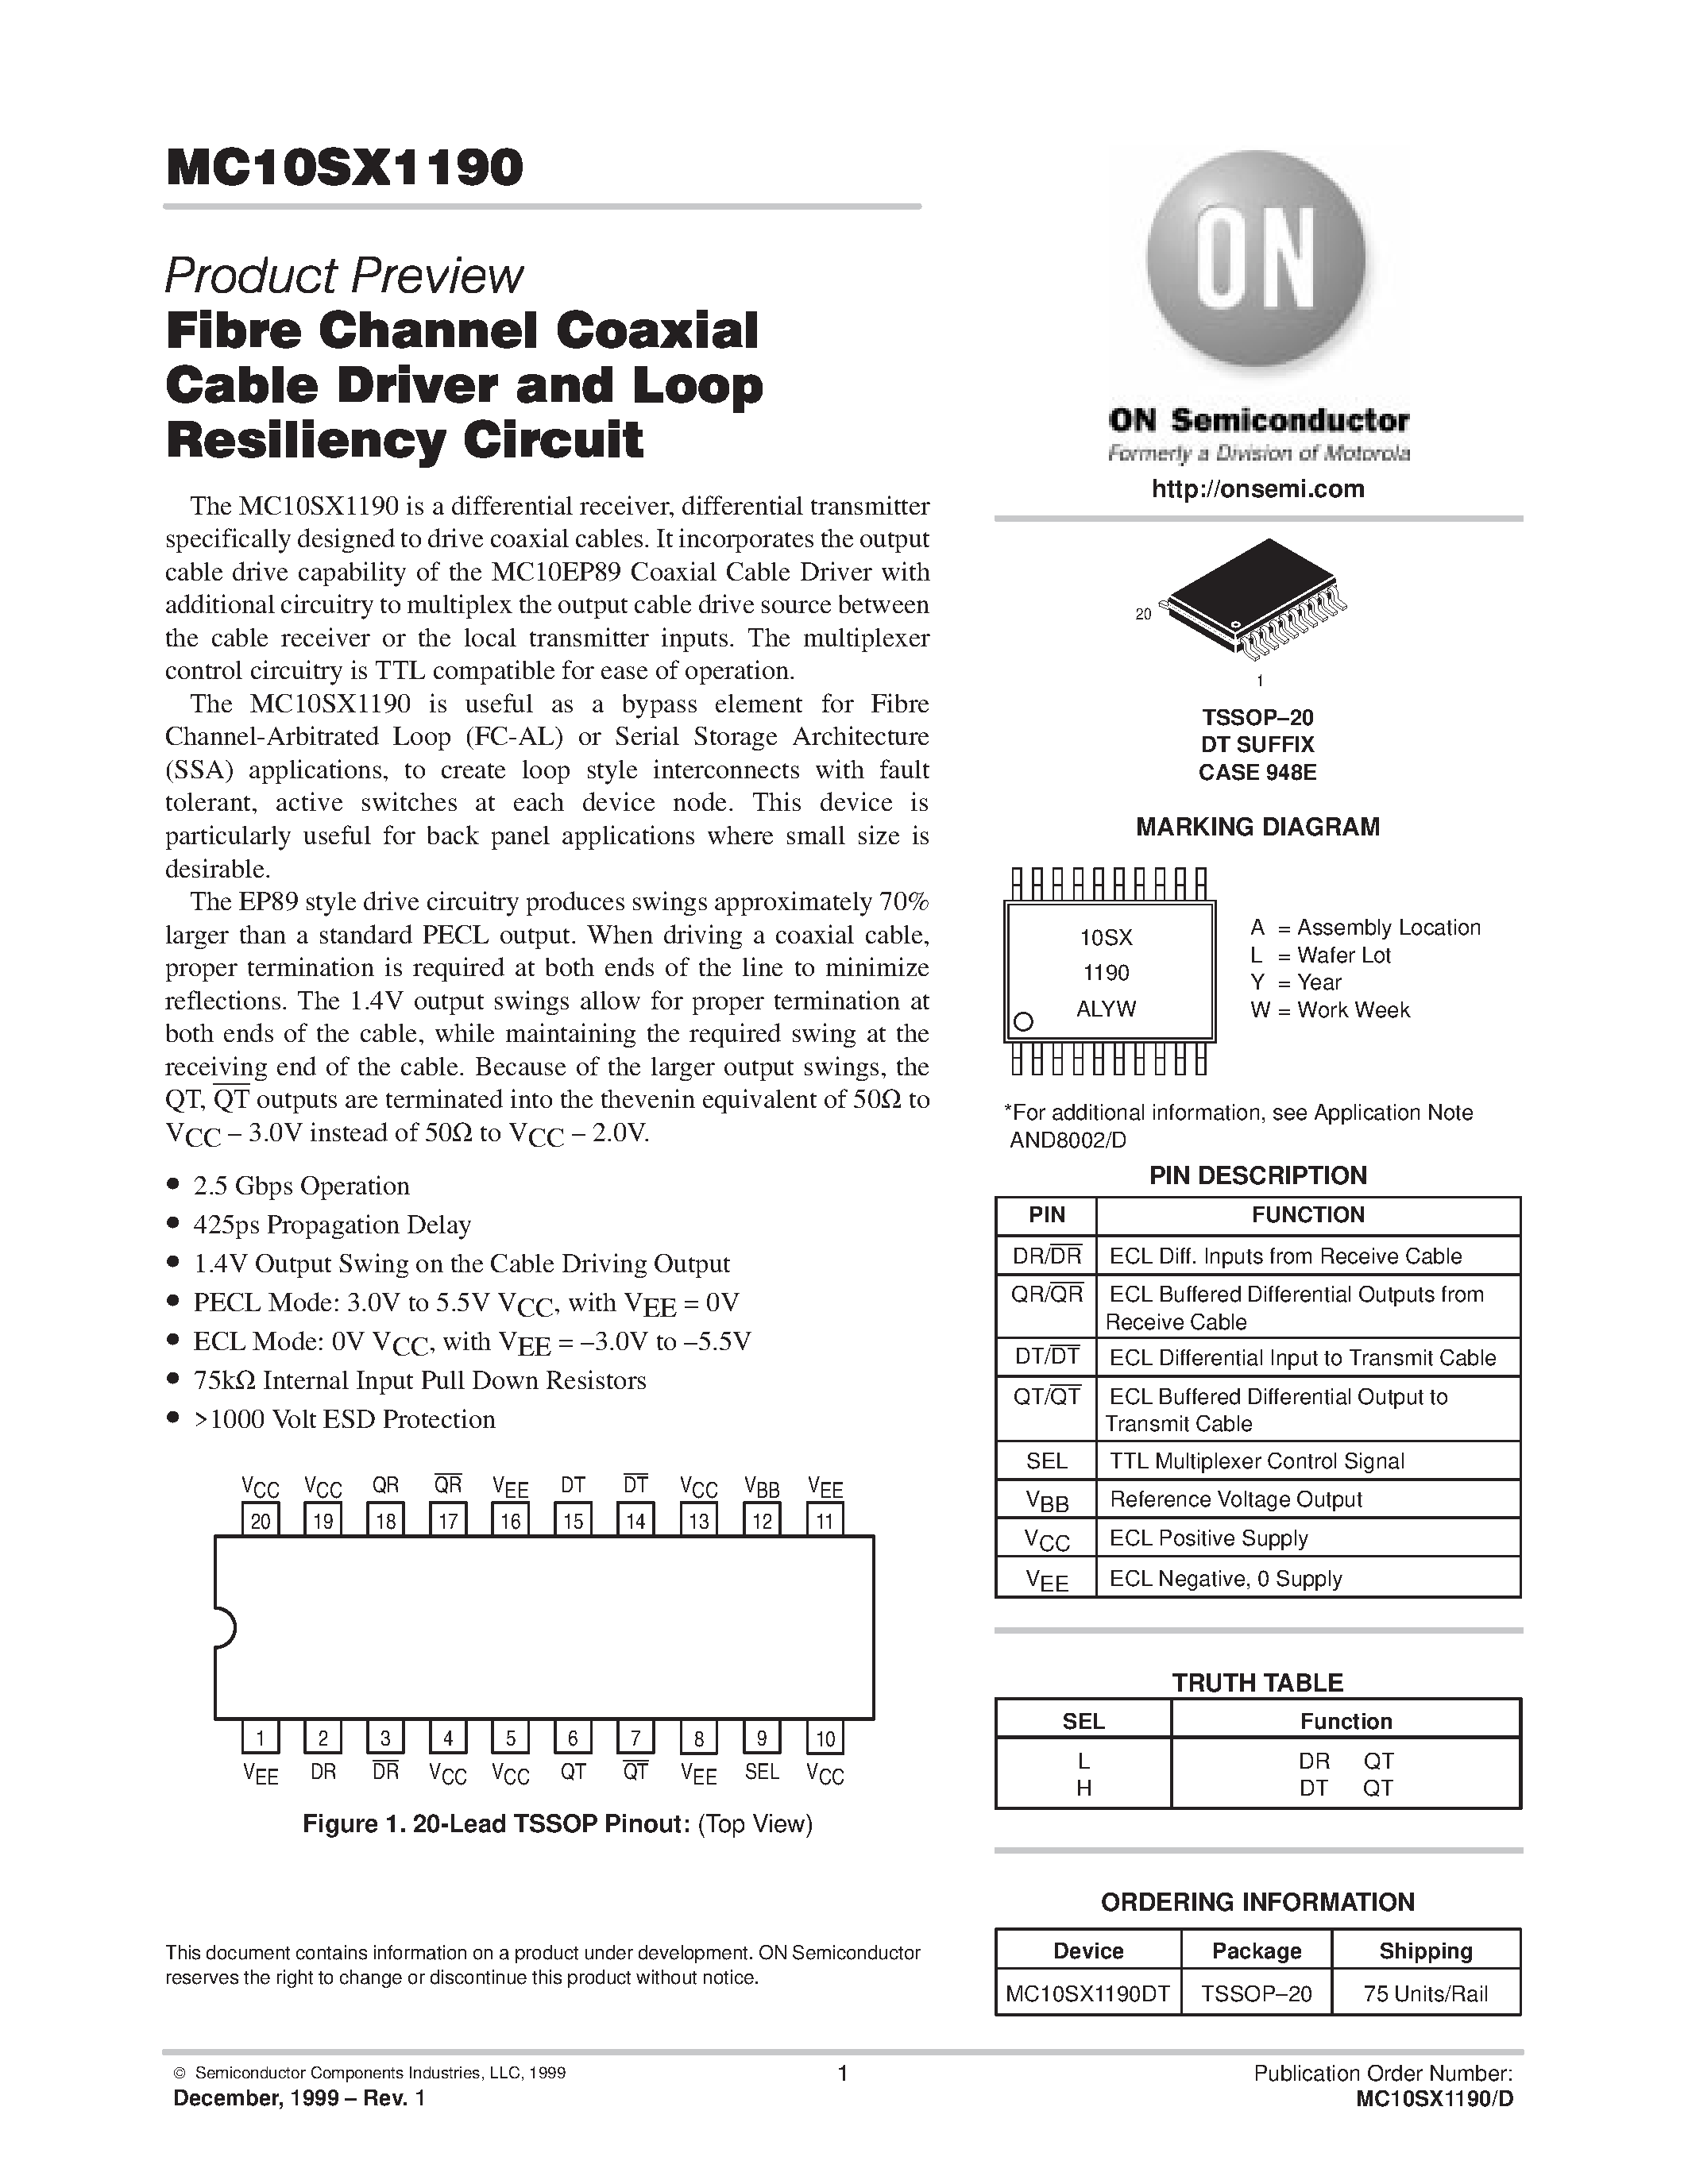 Datasheet MC10SX1190 - Fibre Channel Coaxial Cable Driver and Loop Resiliency Circuit page 1